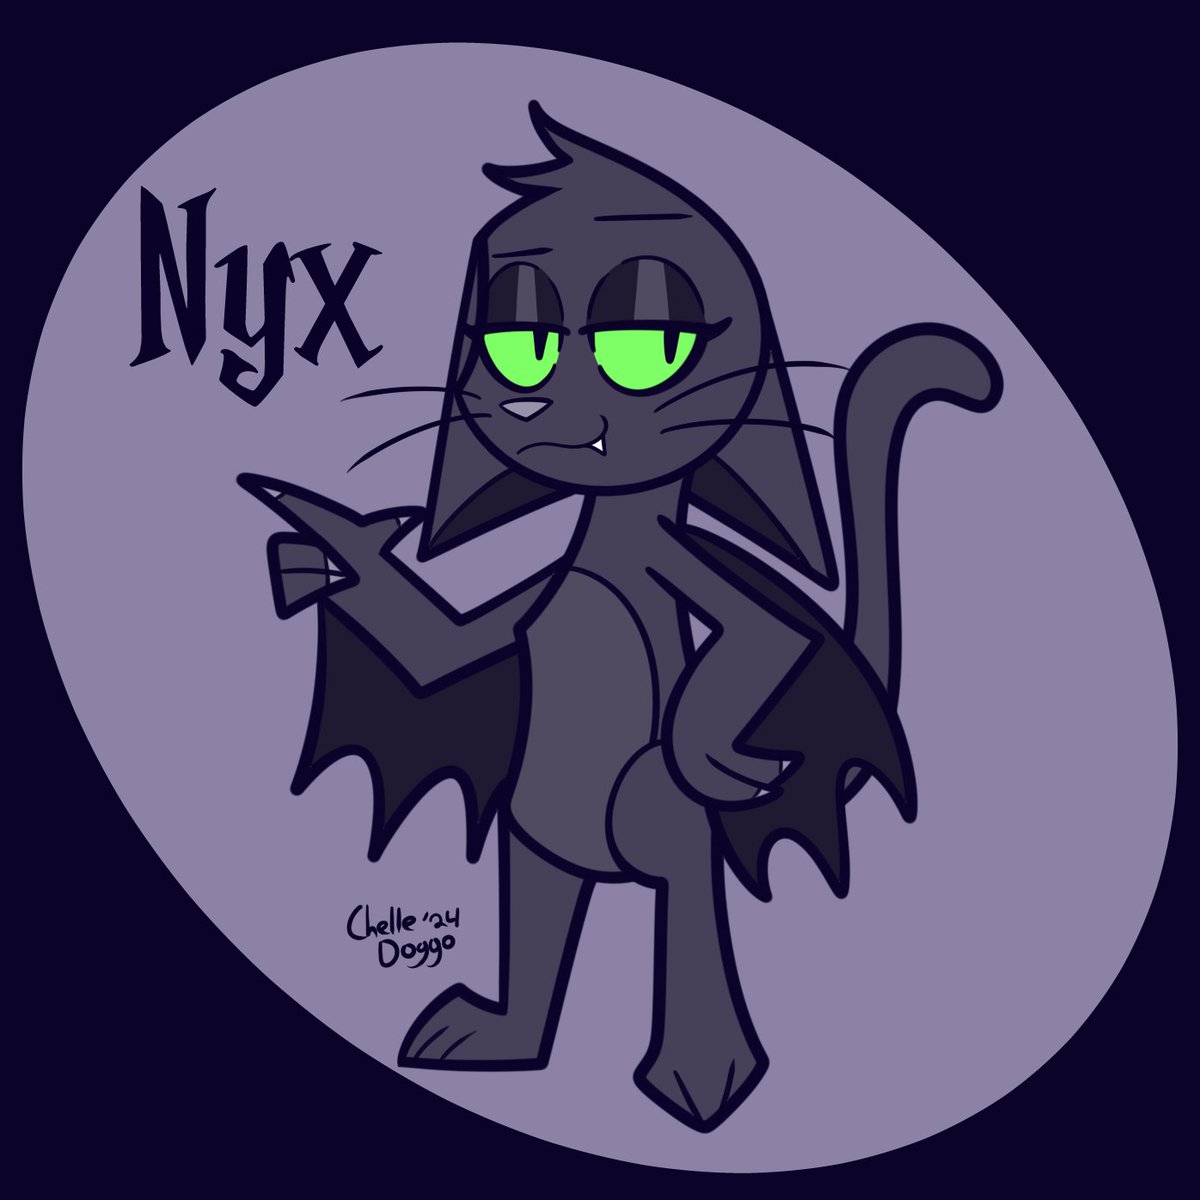 「this is Nyx the cat-bat! she's Wymzie's 」|✨CHELLE D☯GGO✨のイラスト